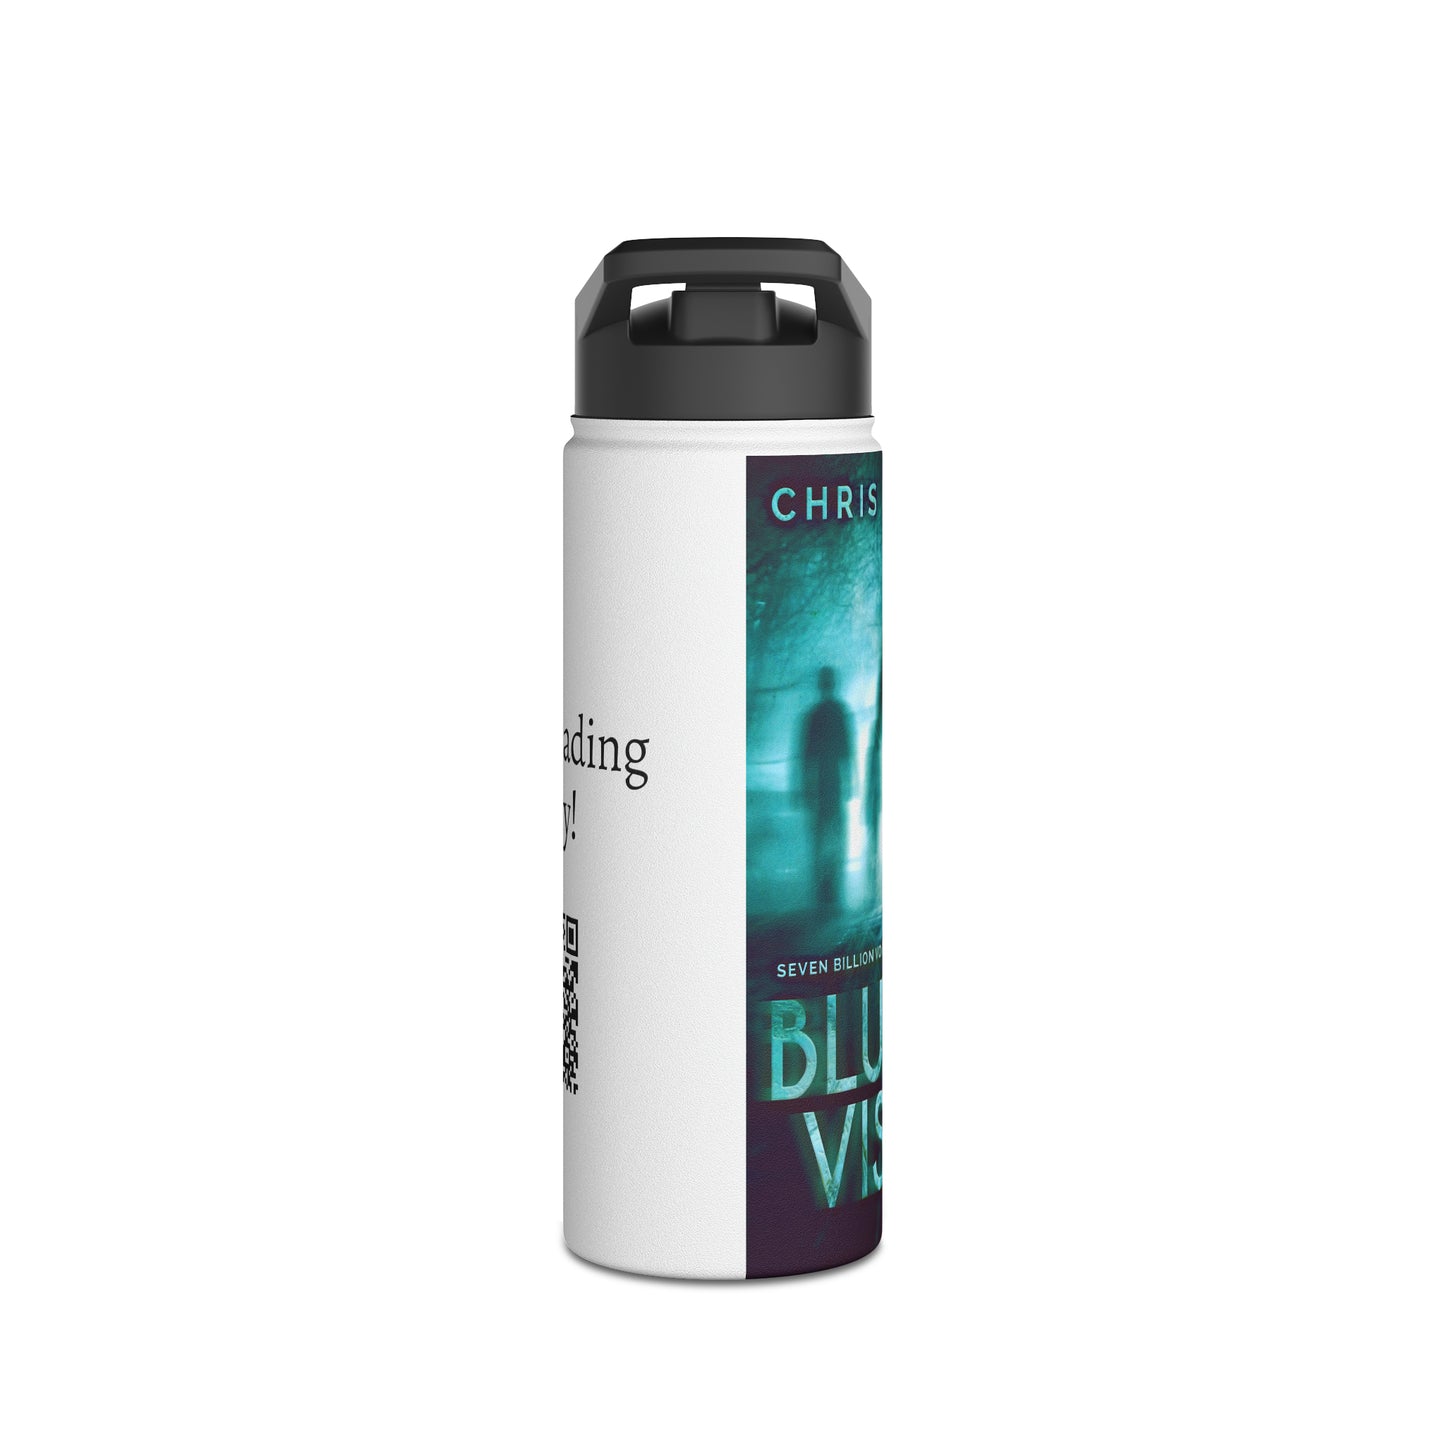 Blurred Vision - Stainless Steel Water Bottle